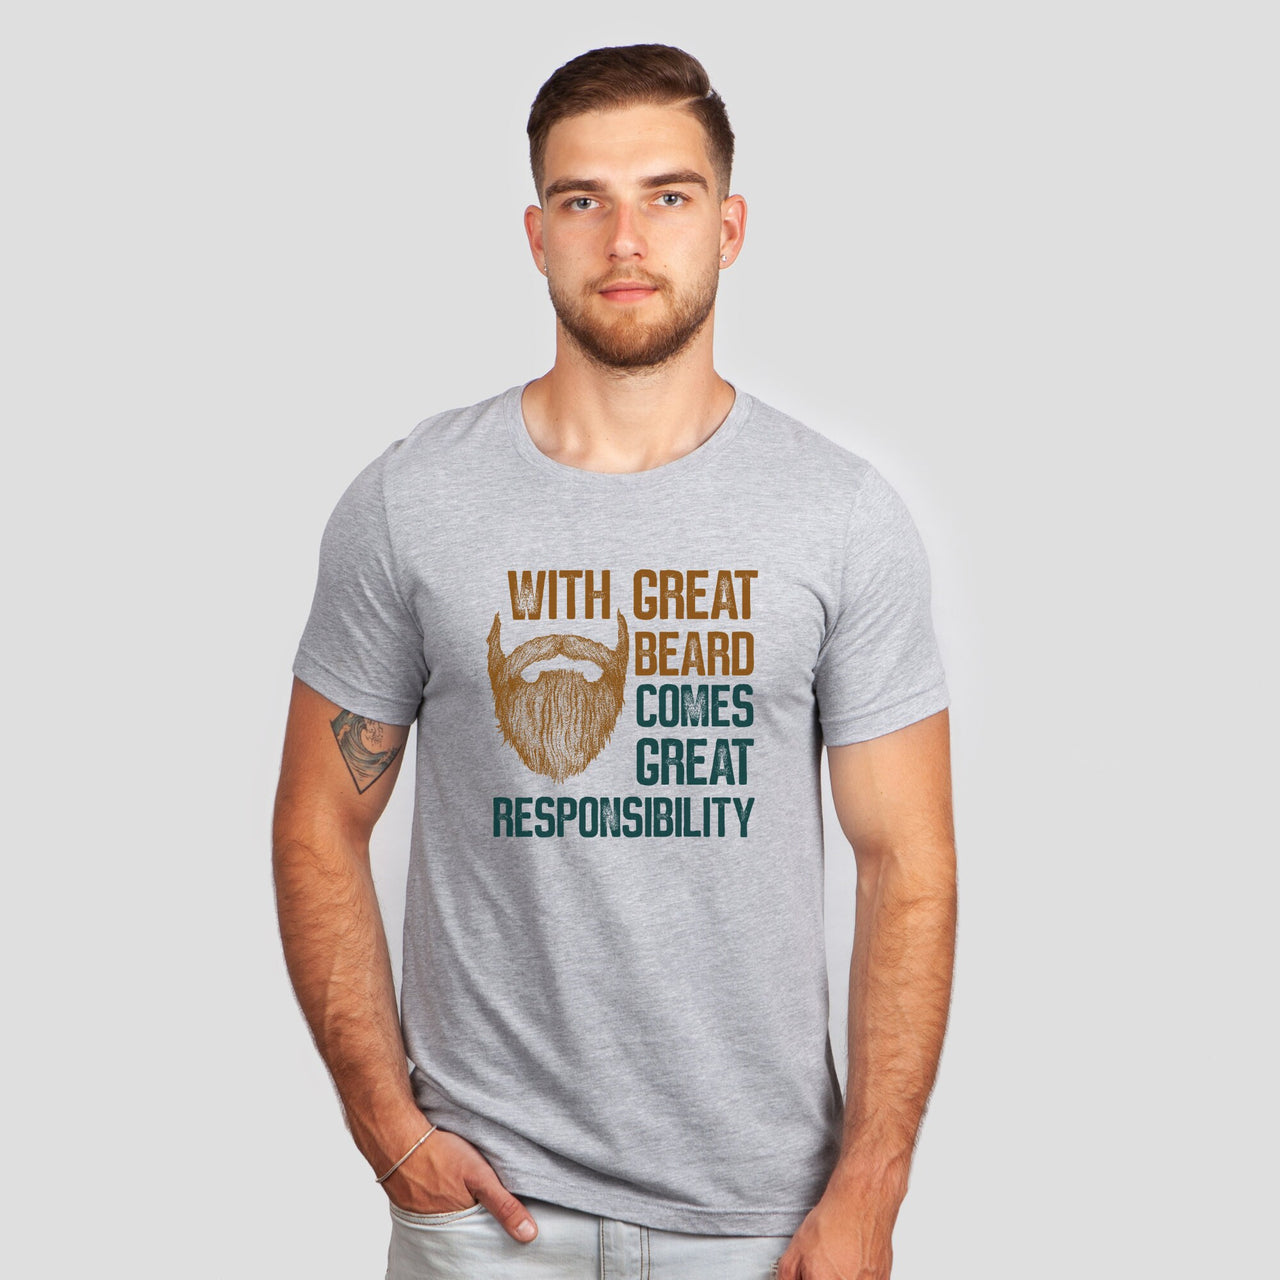 With Great Beard Comes Great Responsibility Tee